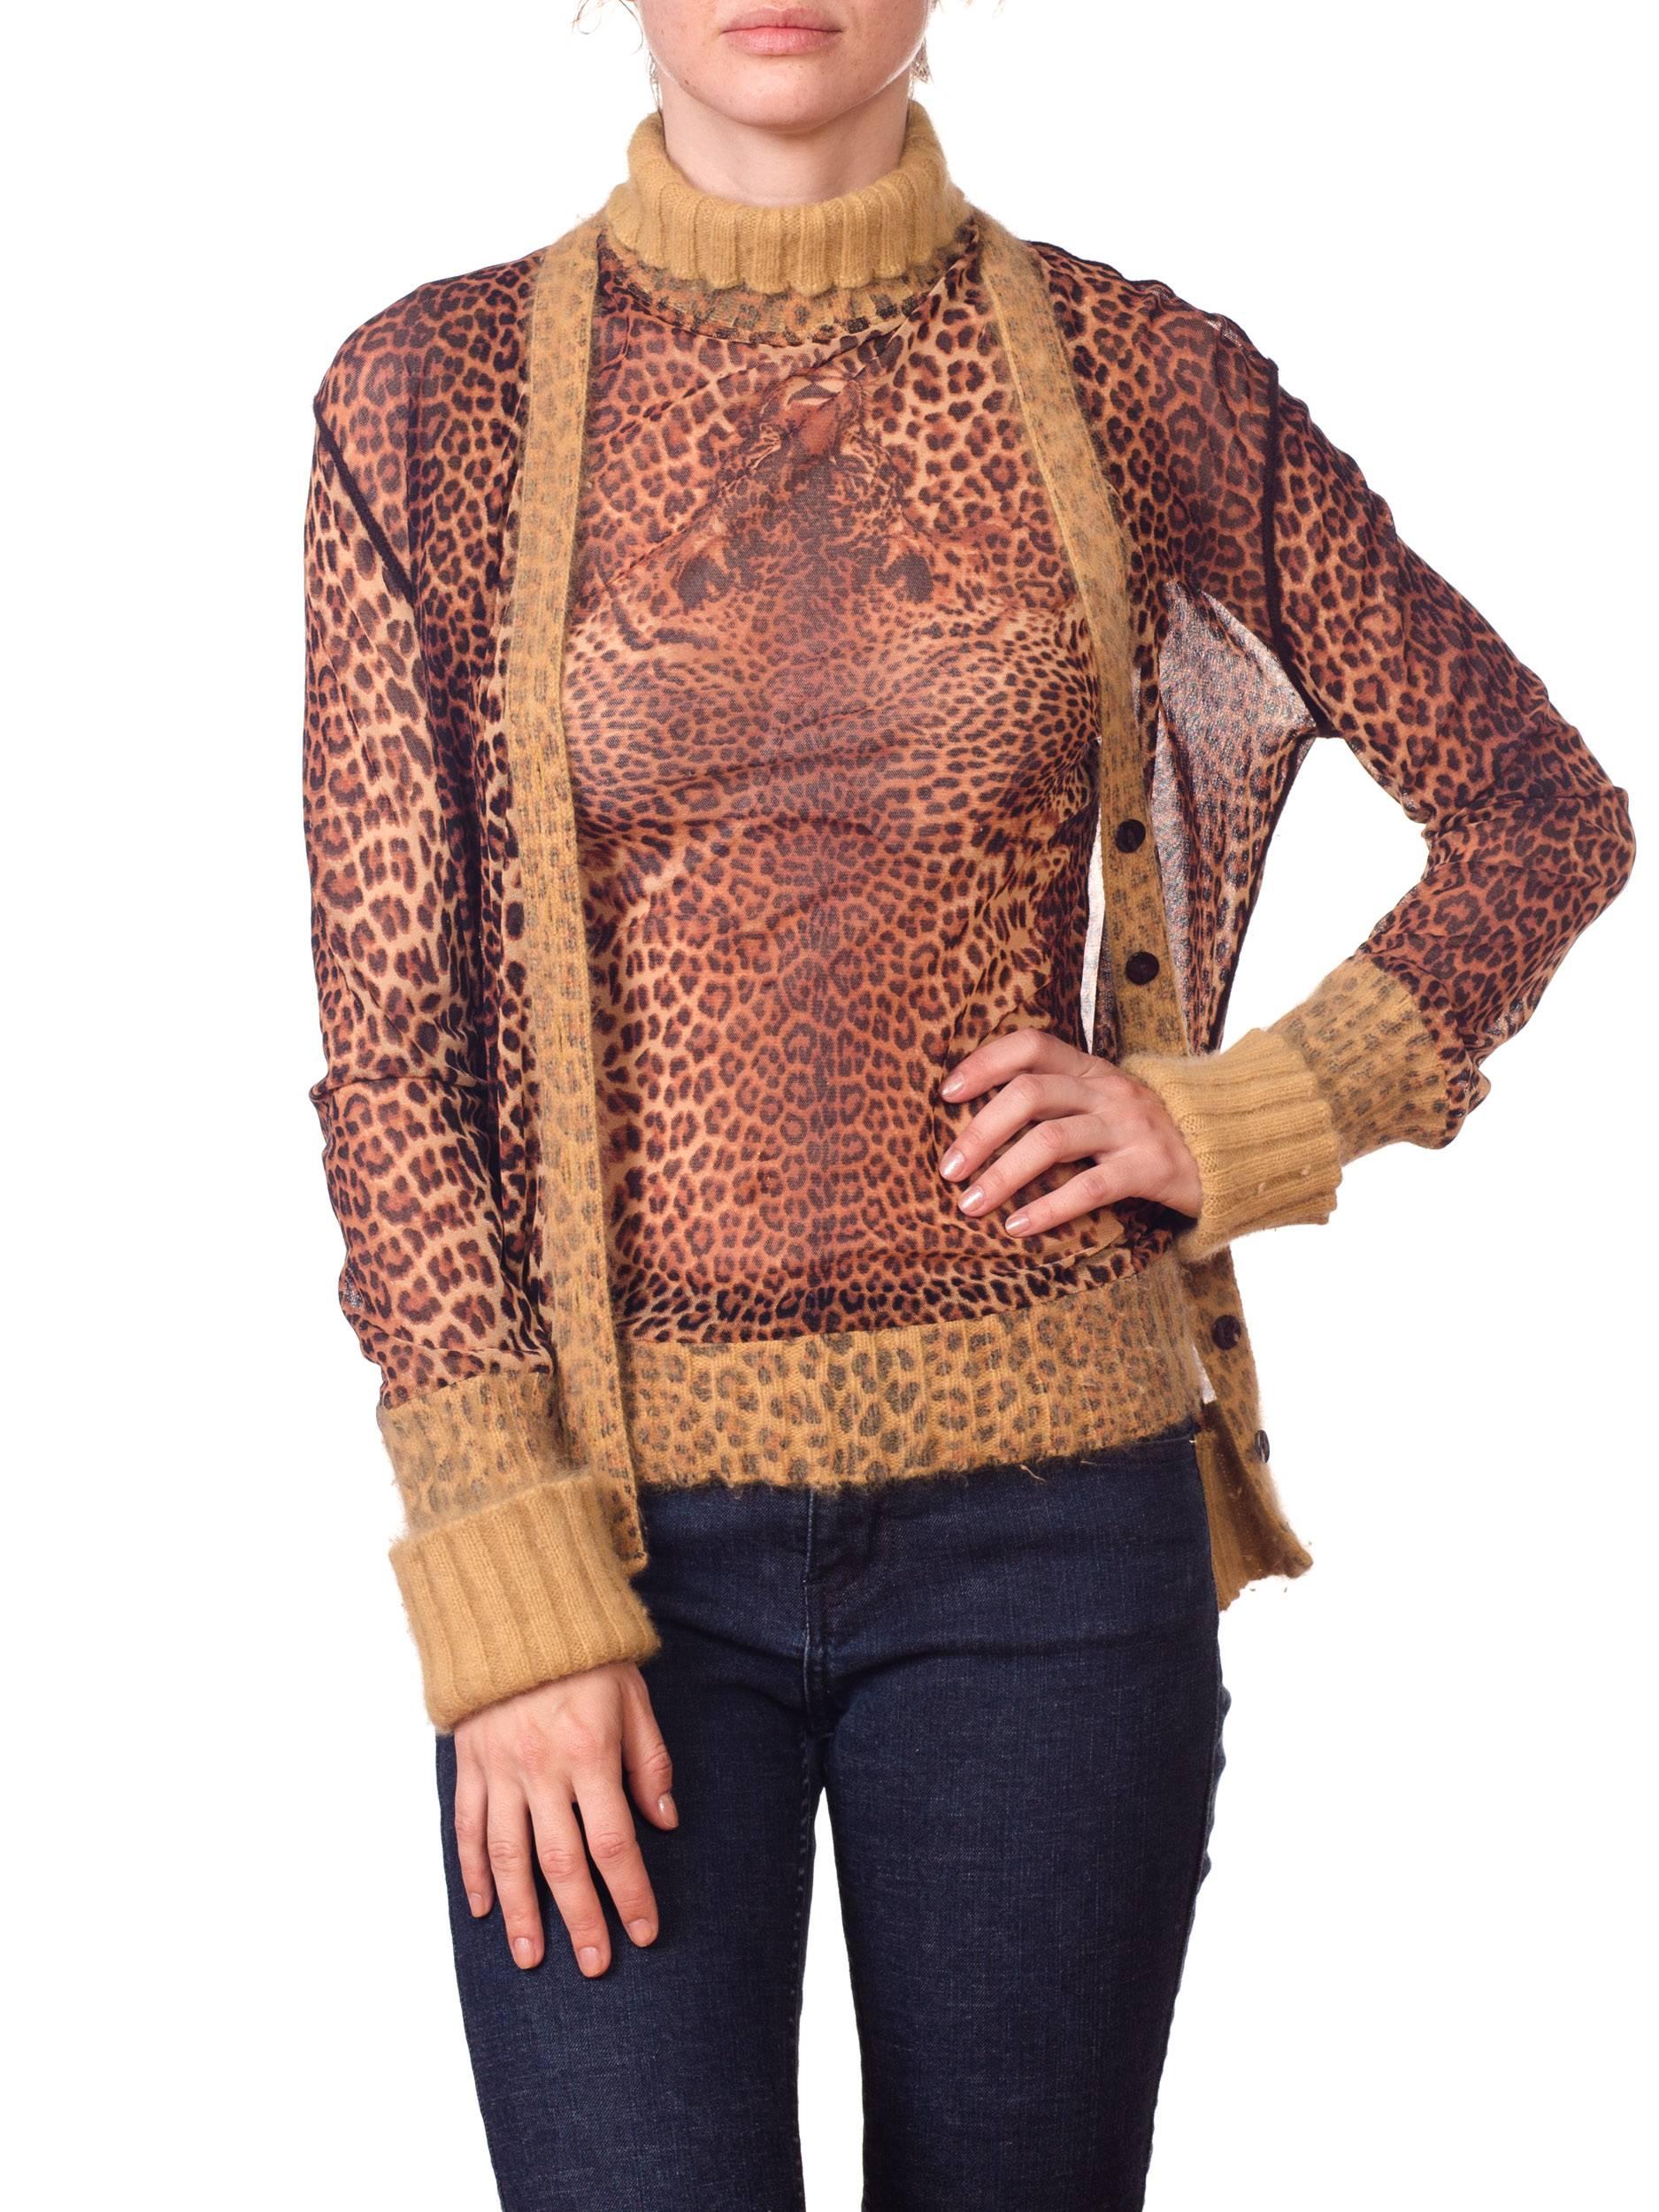 Brown 2000S JEAN PAUL GAULTIER Leopard Mesh Top And Cardigan Ensemble With Angora Trim